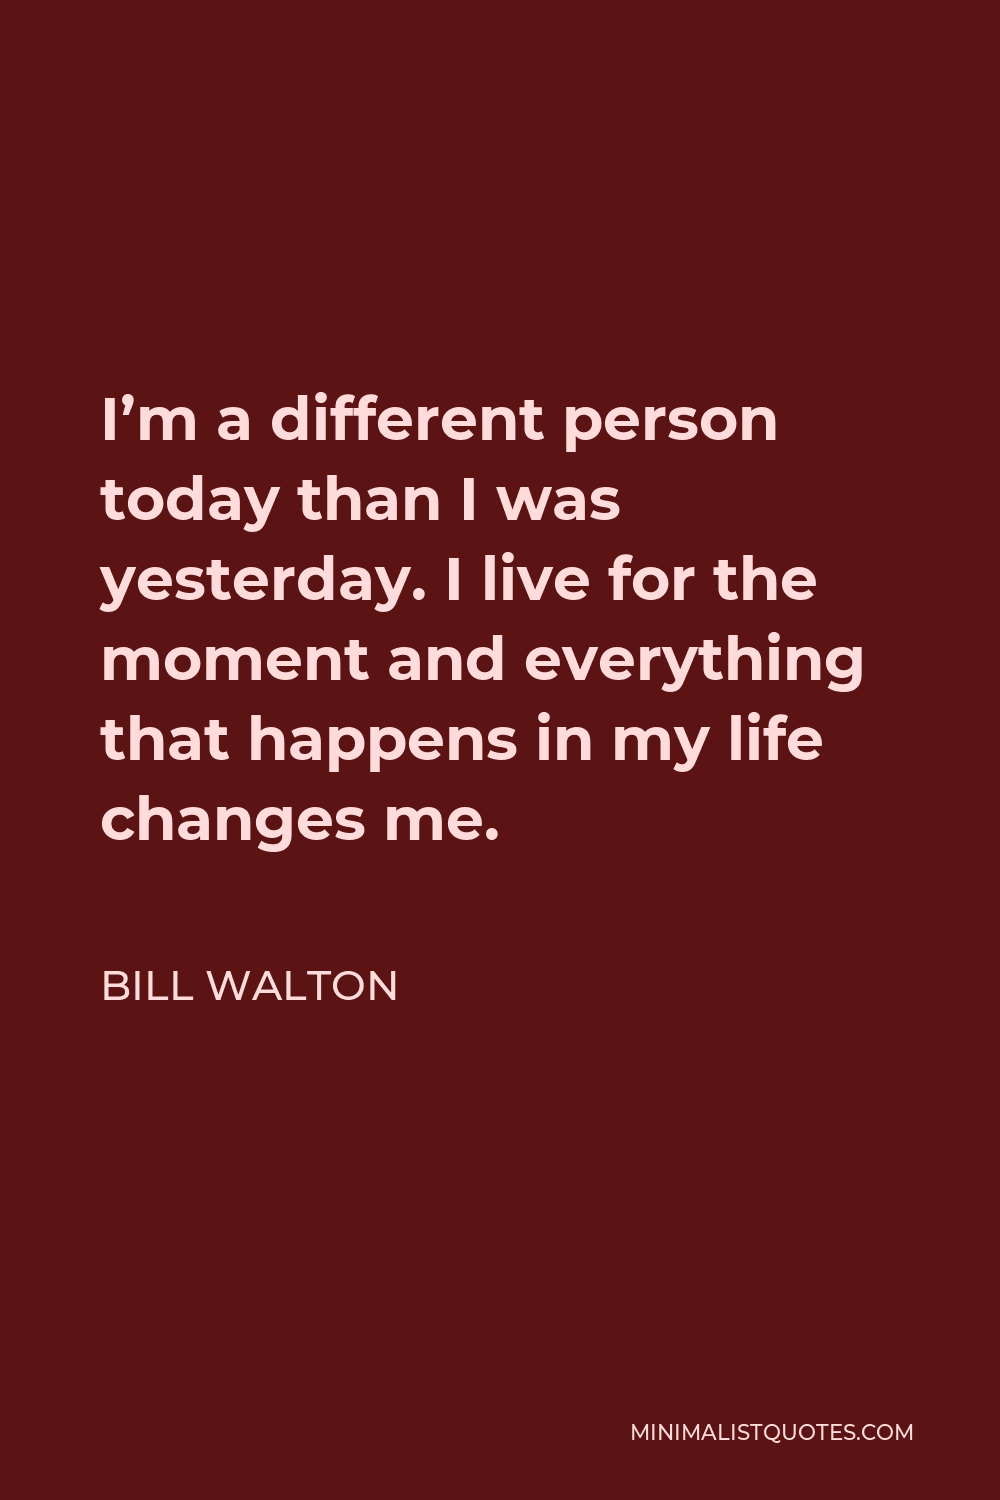 Bill Walton Quote - I’m a different person today than I was yesterday. I live for the moment and everything that happens in my life changes me.